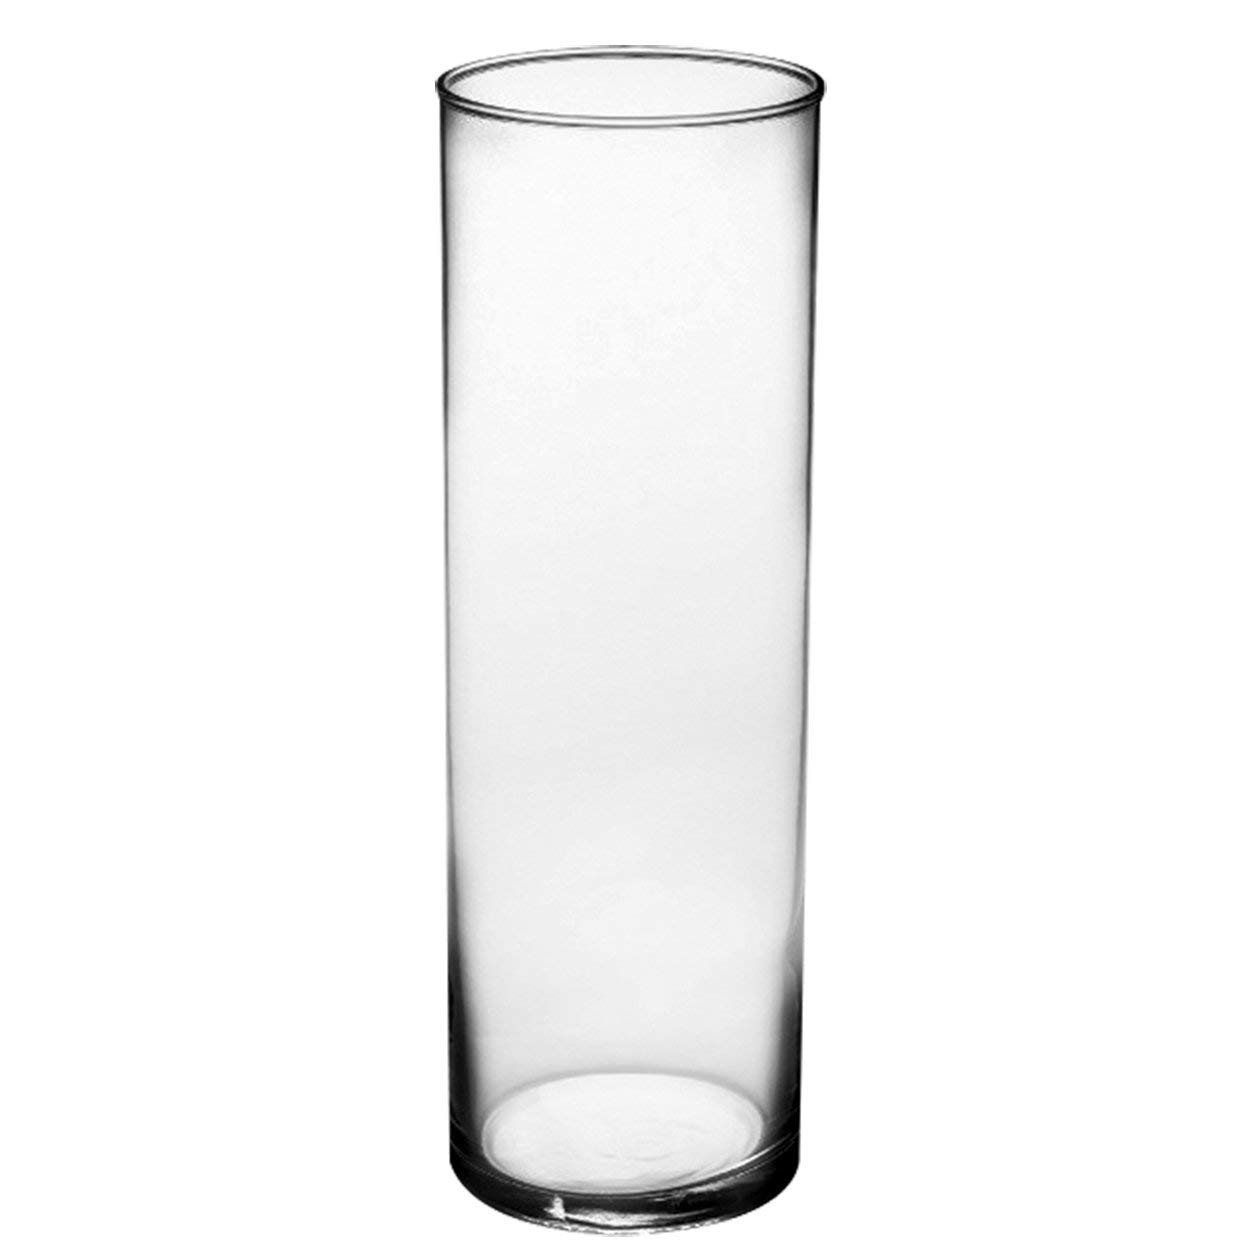 25 Elegant 3 Piece Glass Vase Set 2024 free download 3 piece glass vase set of amazon com syndicate sales 3 1 2 x 10 1 2 cylinder vase clear with regard to amazon com syndicate sales 3 1 2 x 10 1 2 cylinder vase clear planters garden outdoor